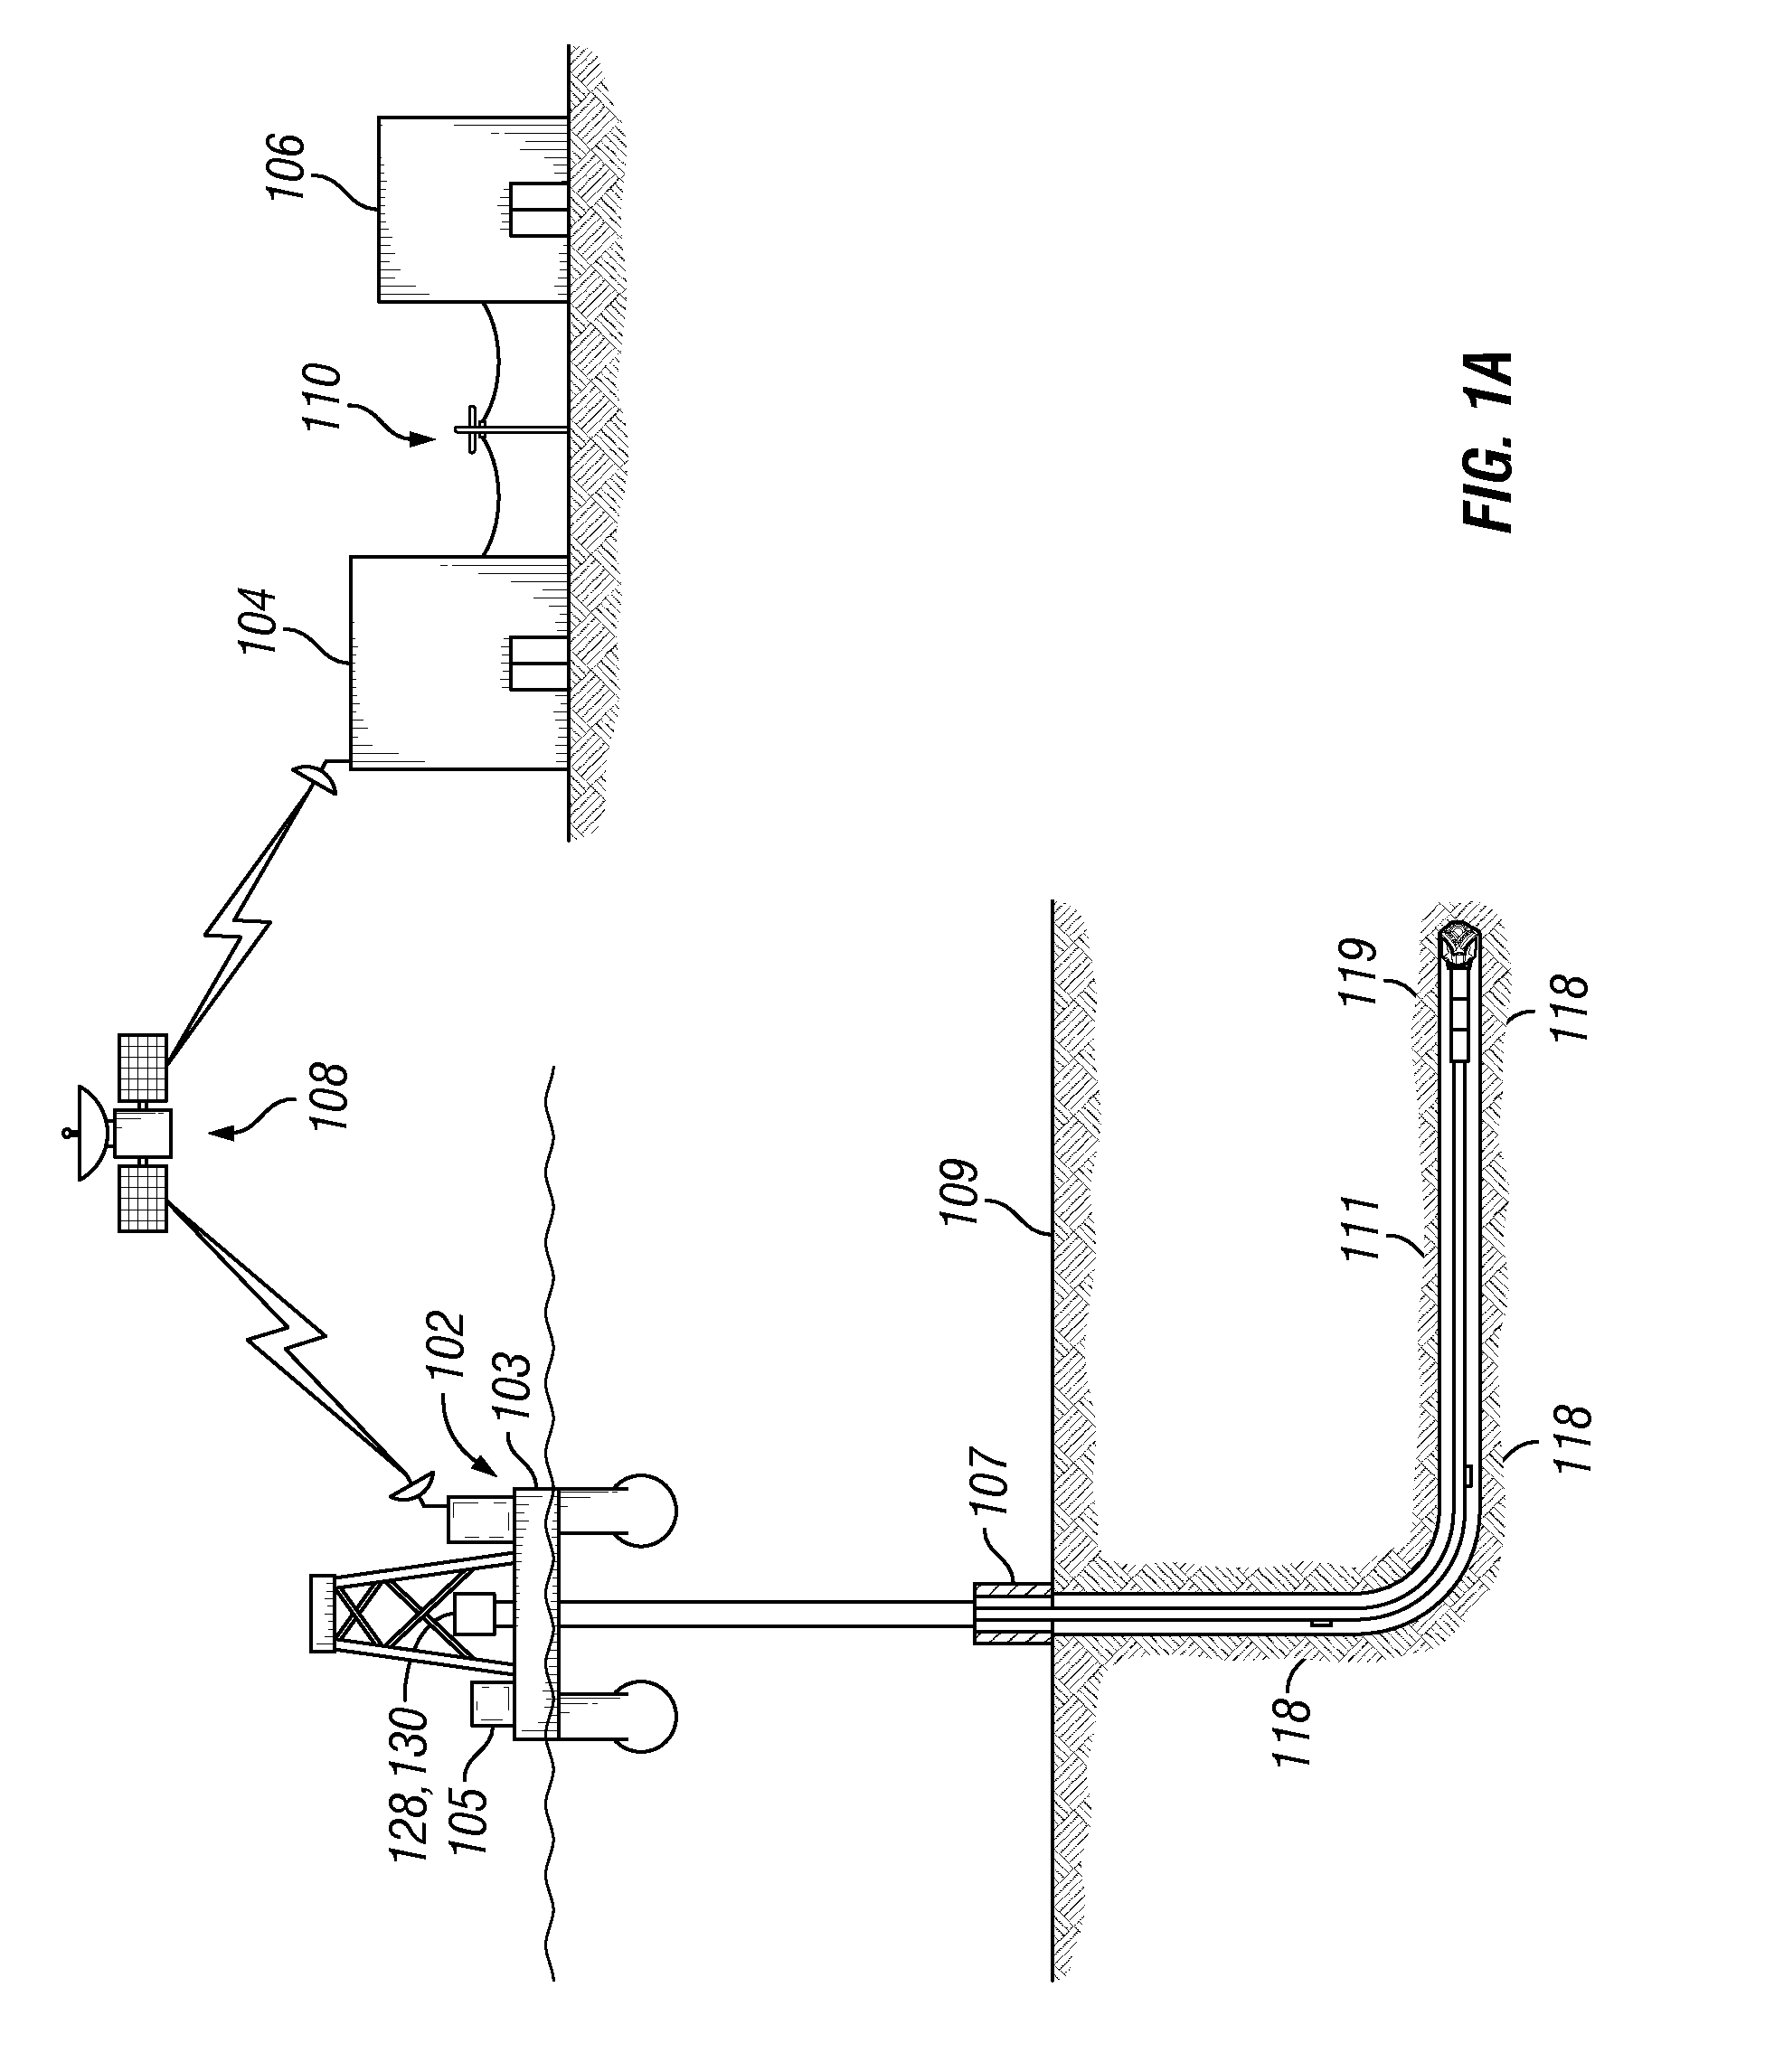 Drilling control and information system